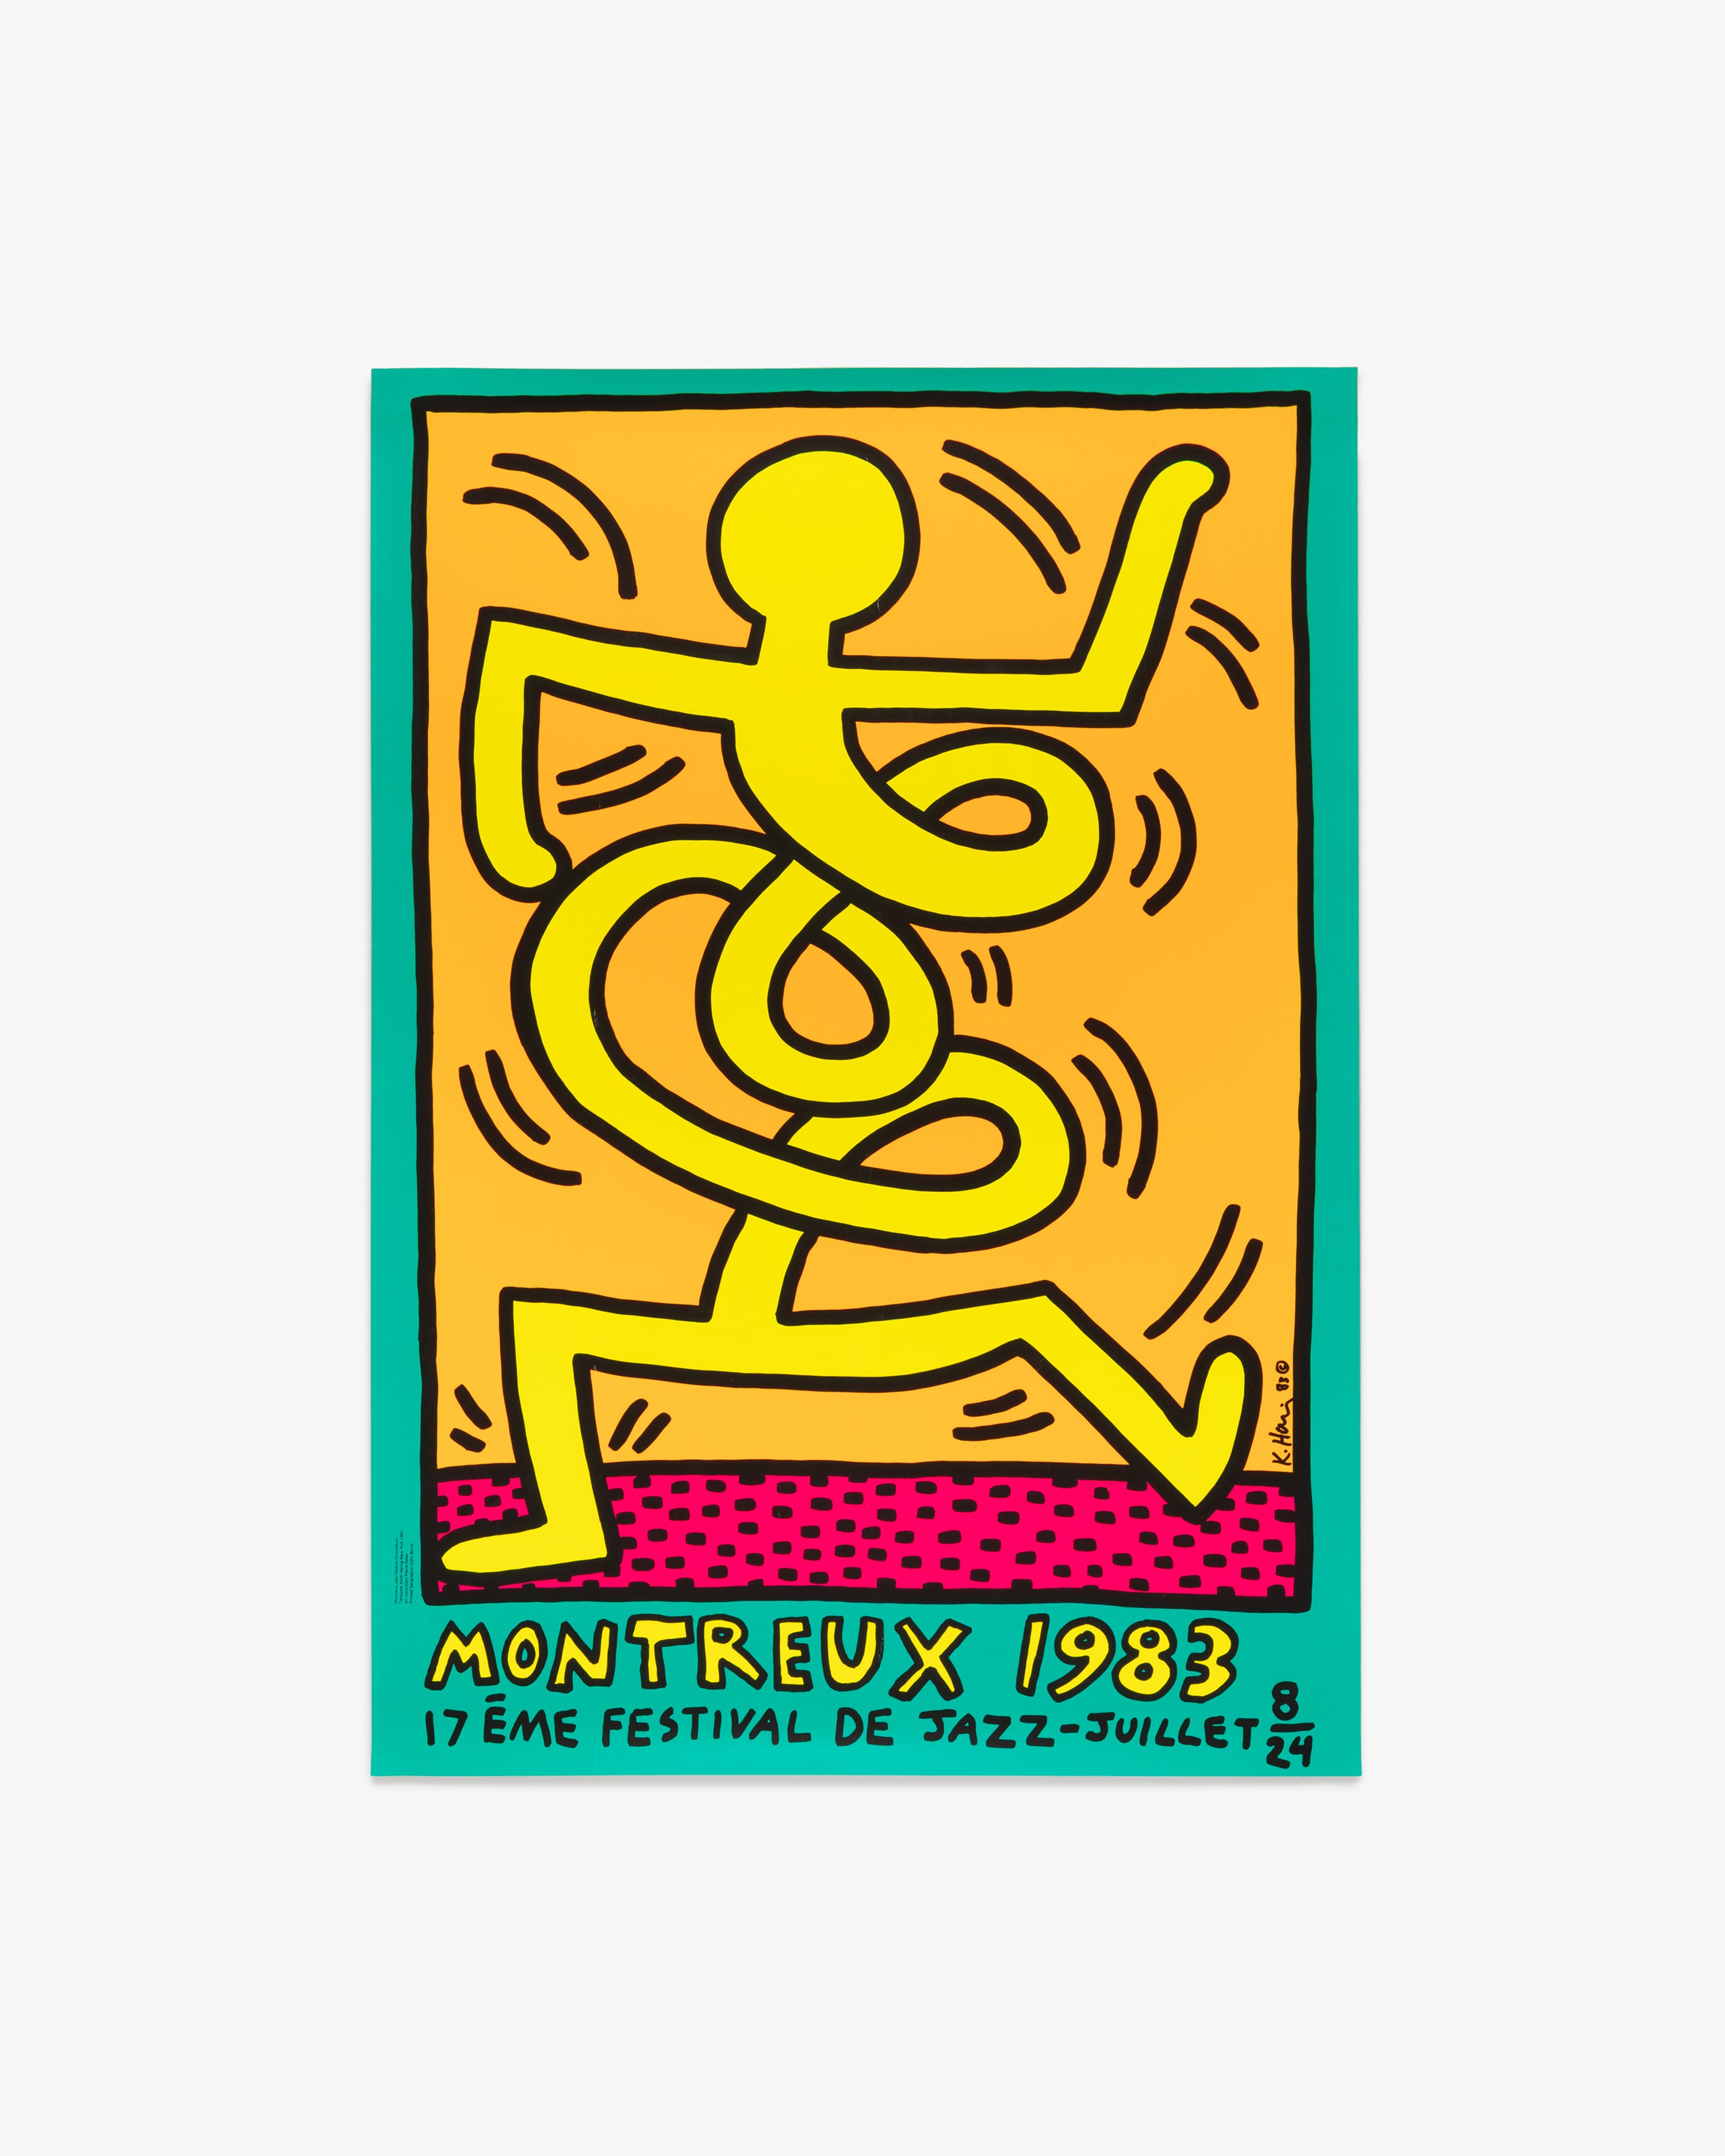 Montreux Jazz Festival 1983 Original Keith Haring Poster